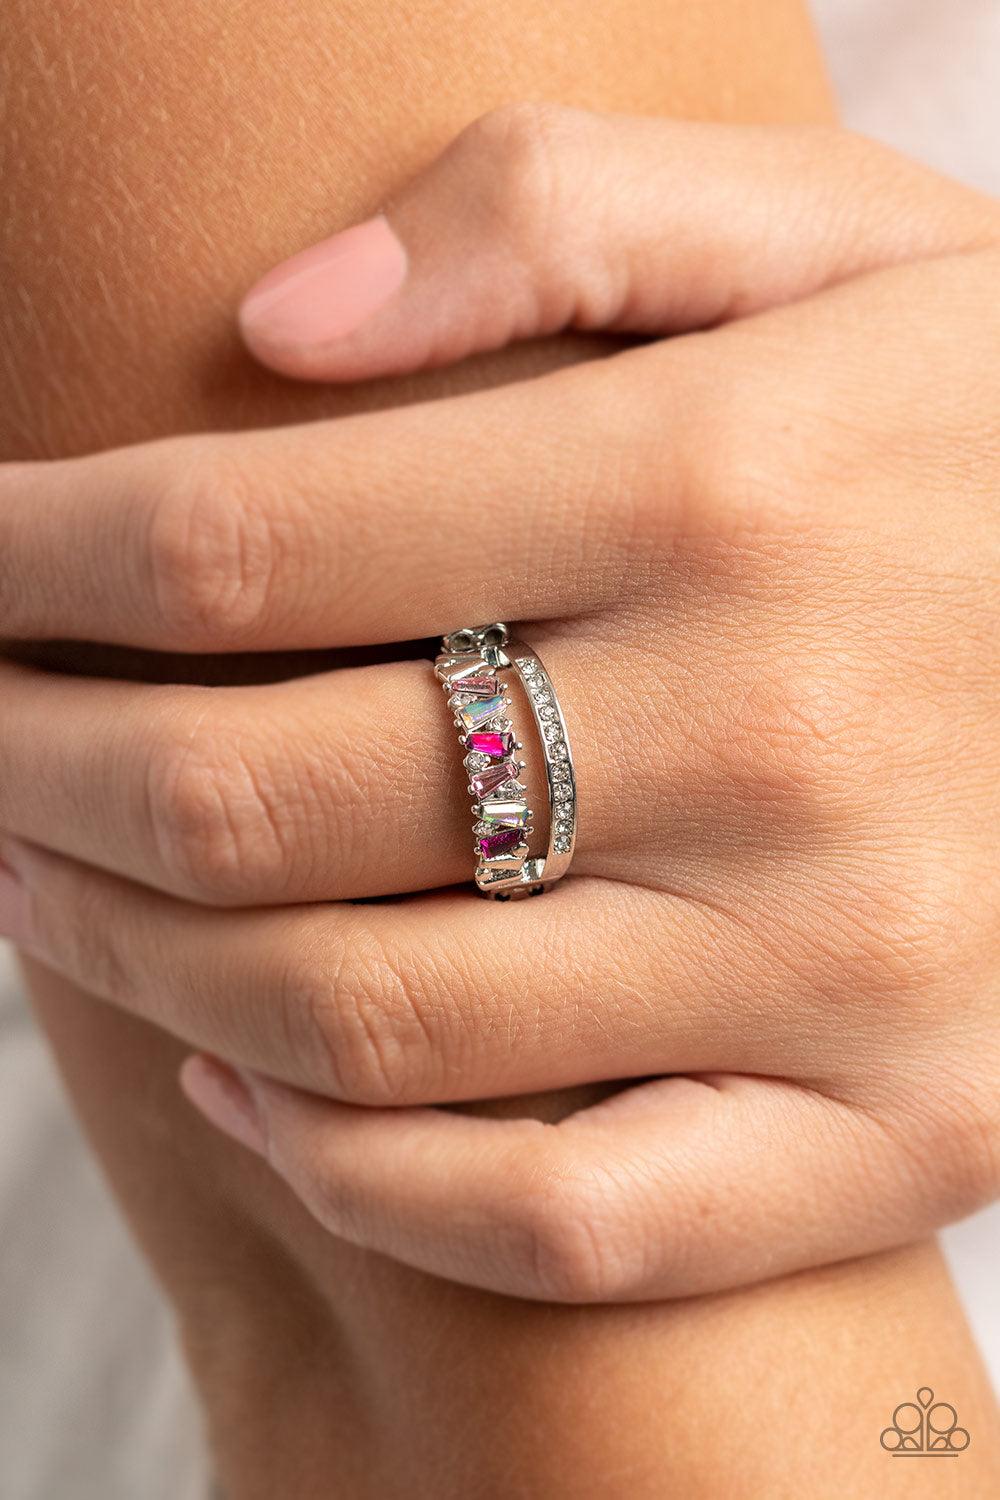 Paparazzi Accessories Fractal Fascination - Pink Infused with a timeless band of white rhinestones, a dainty collection of trapezoidal light pink, dark pink, and iridescent rhinestones staggers across the finger for a glamorously layered look. Features a